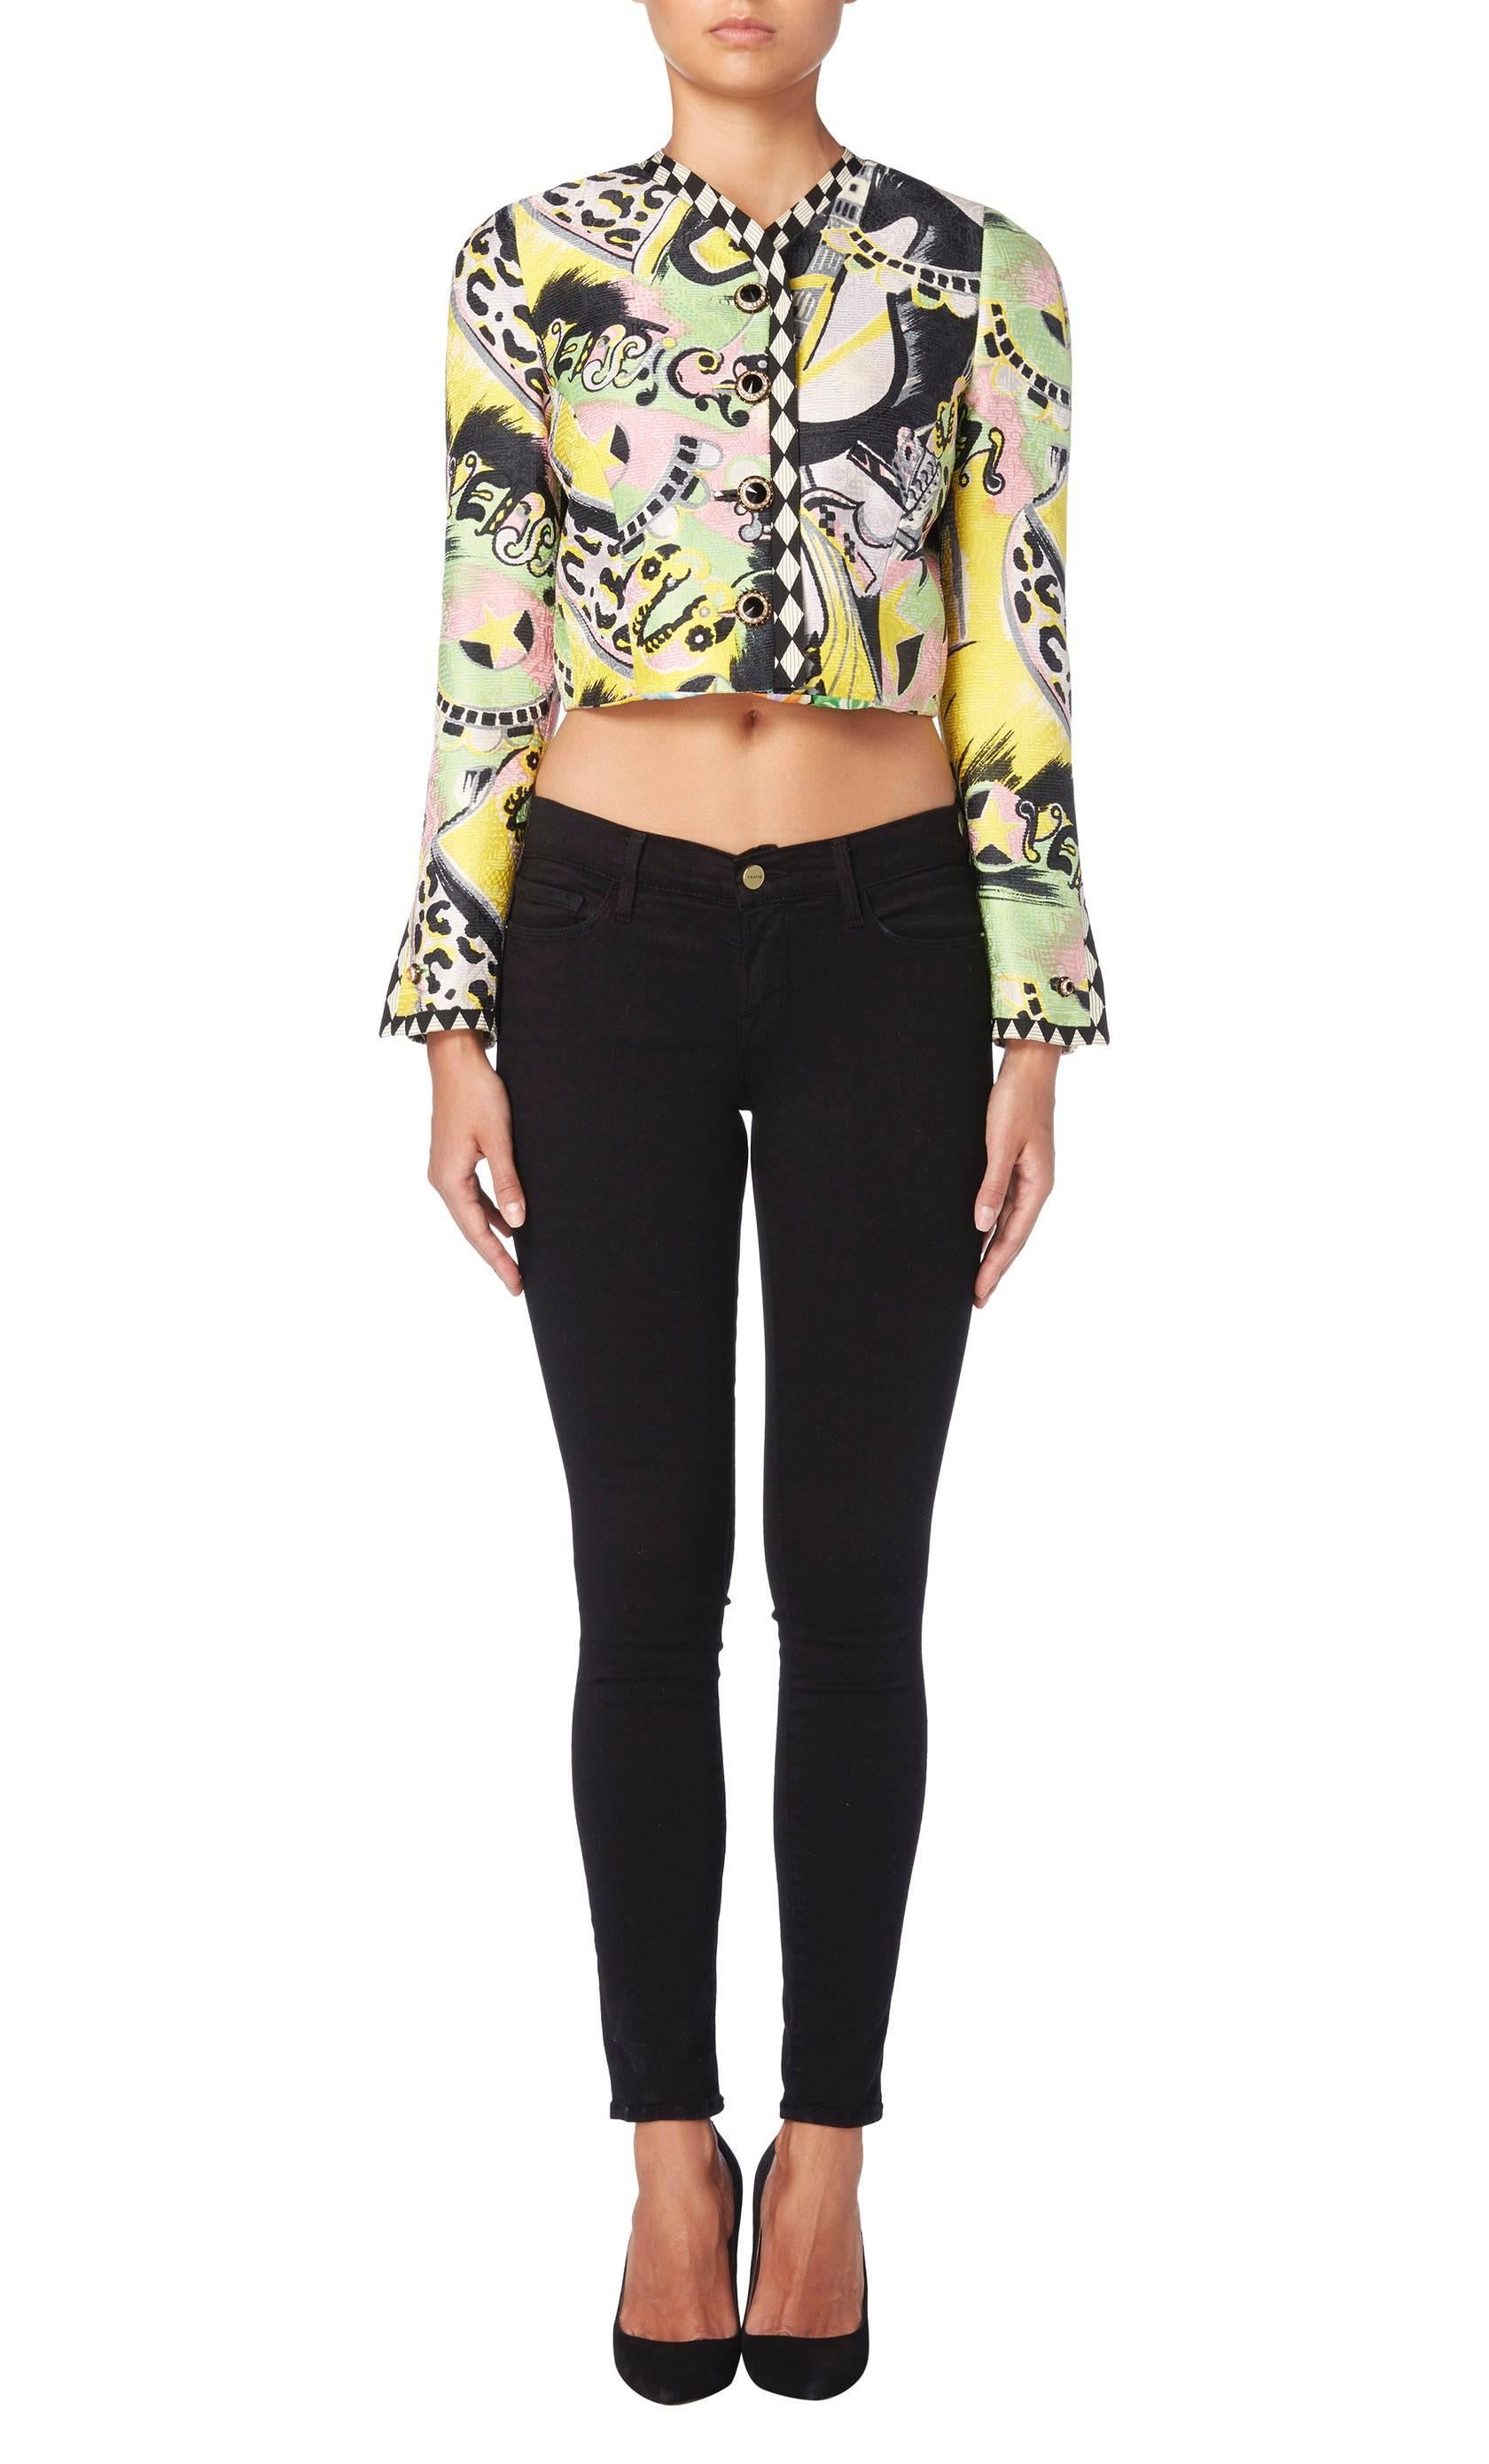 A fabulous piece by Gianni Versace, this haute couture printed jacket will add a touch of colour and fun to an outfit. Constructed in ribbed silk and featuring an abstract print in pink, green, yellow and black, the jacket has a cropped cut and long